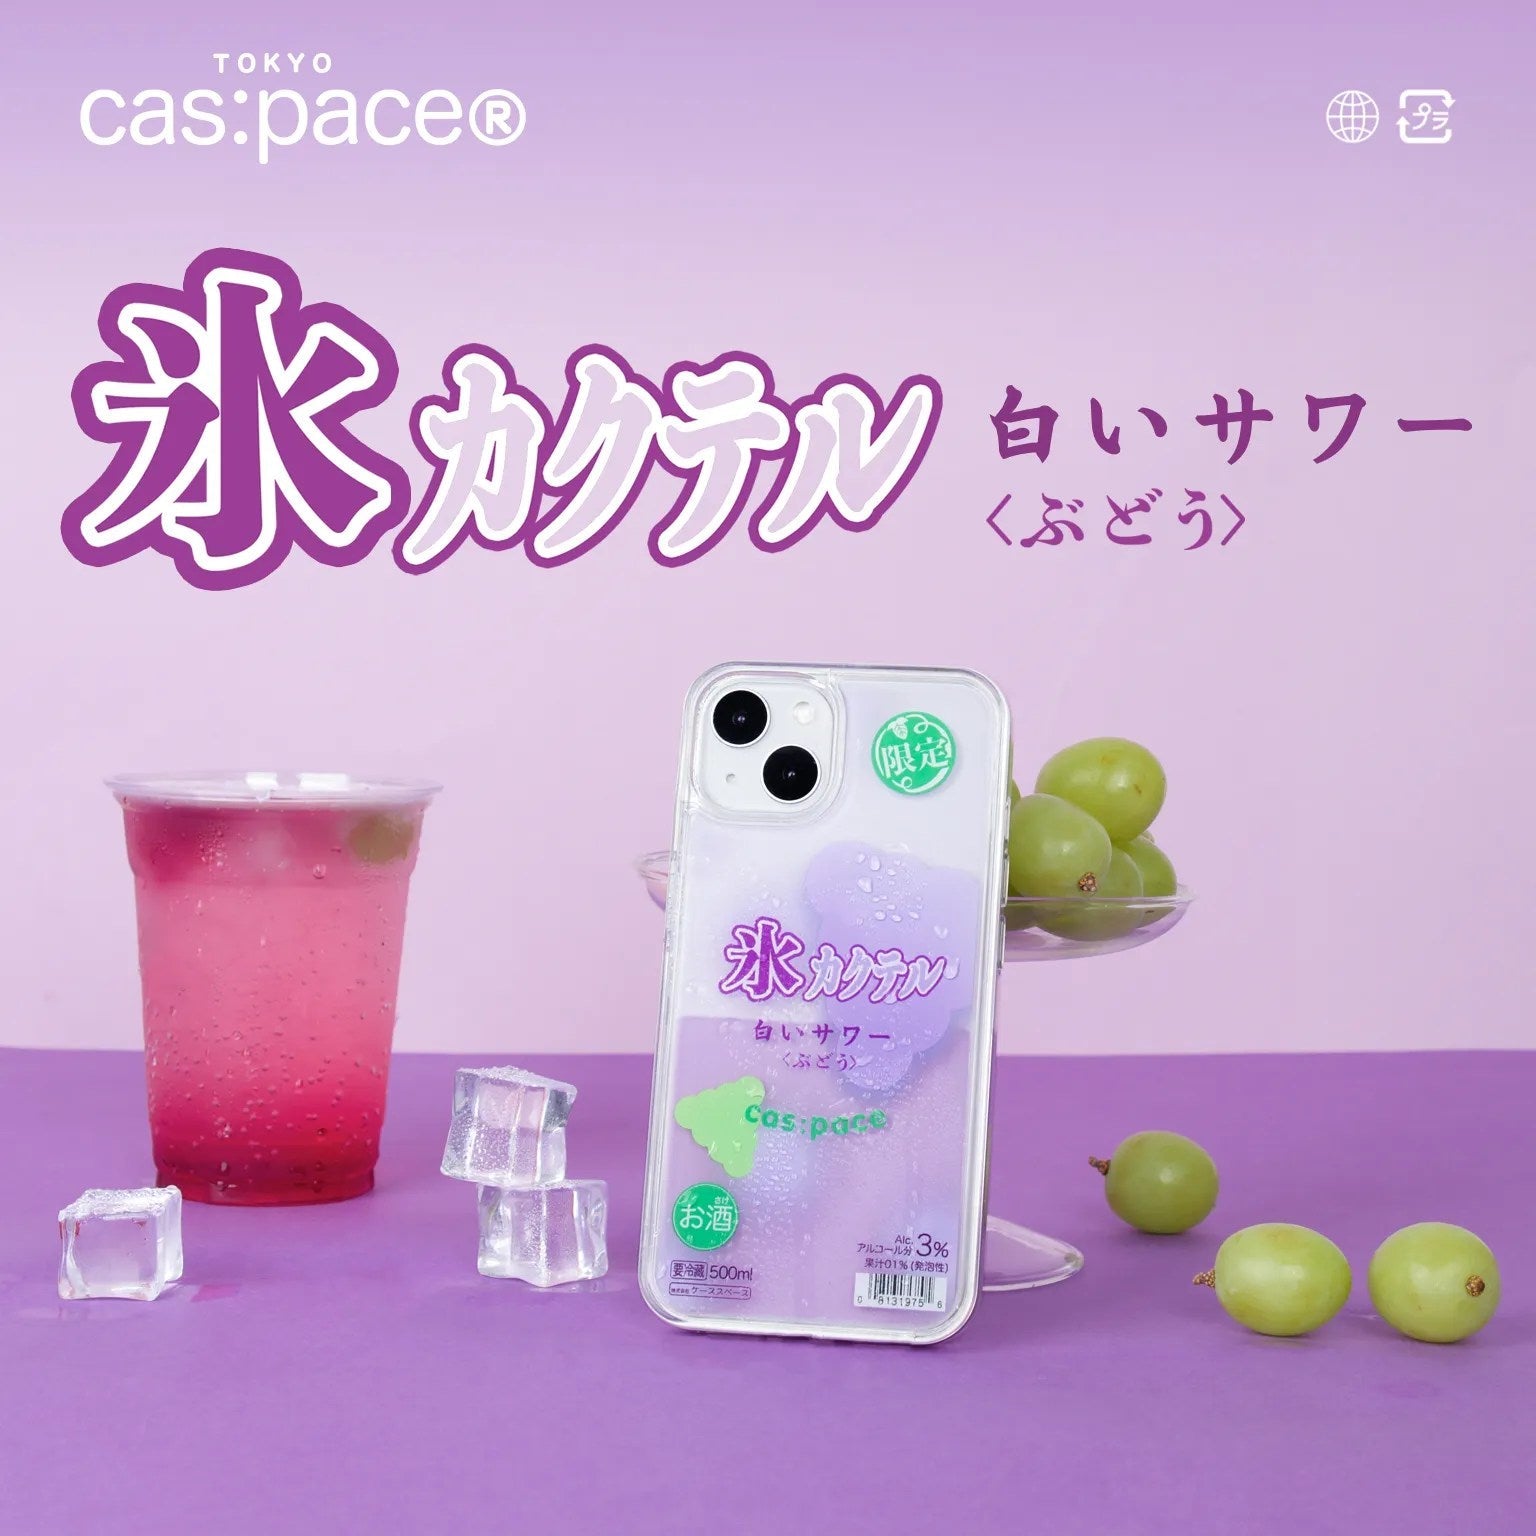 cas:pace 22S/S「氷カクテルーぶどう」流れる携帯ケース - cas:pace 殼空間